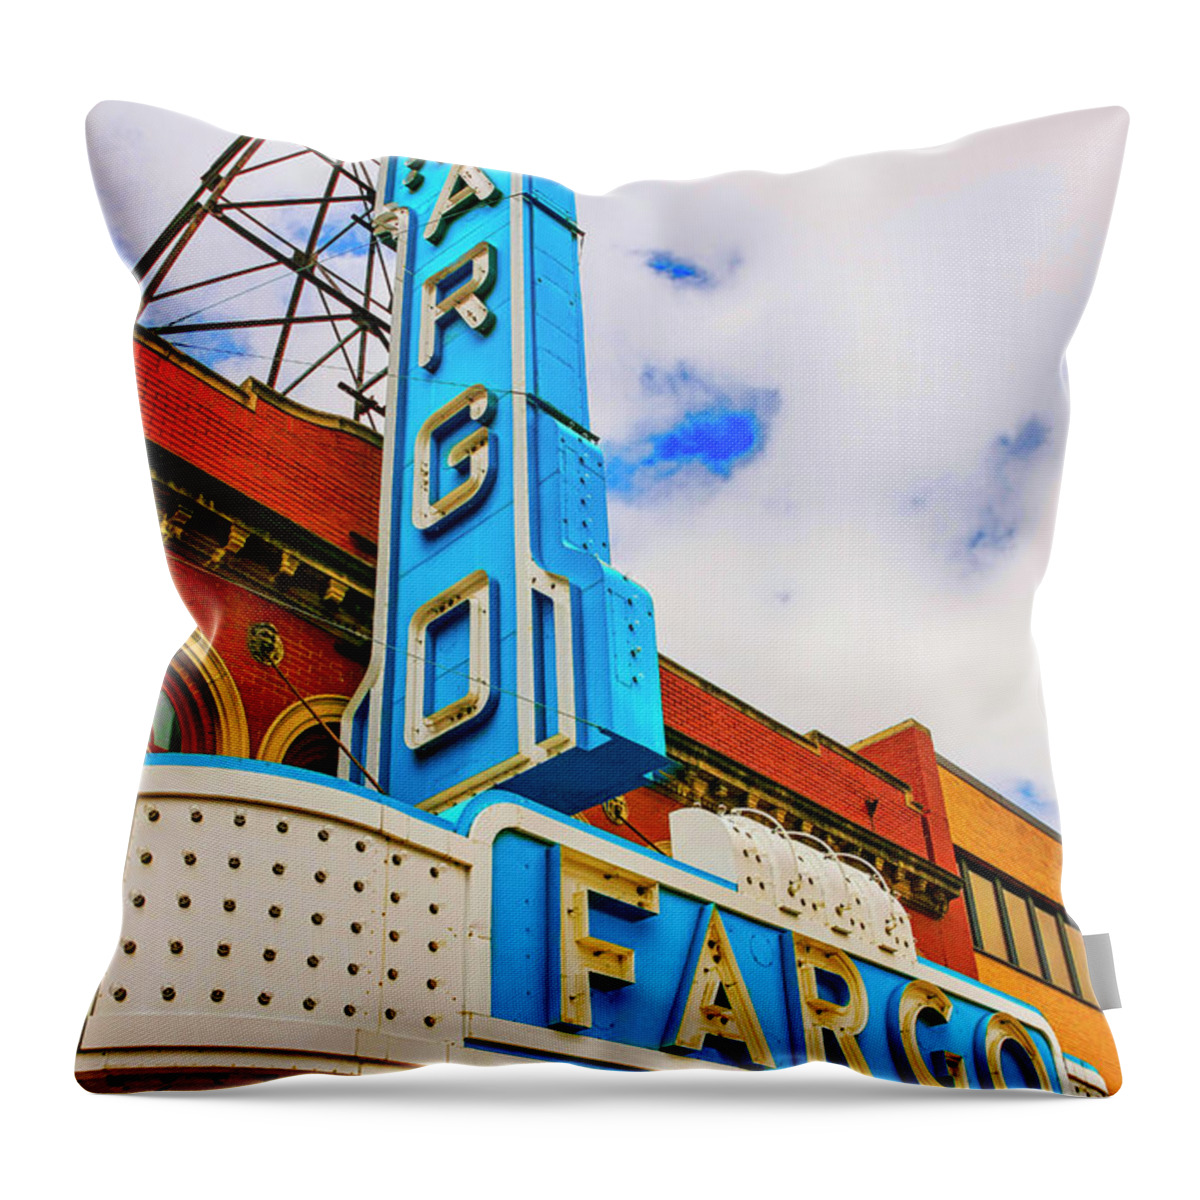 Fargo; Cinema; Blue; Overhead; Sign; City; Theater; Movie-house; Big; Screen; Film; Flicks; Motion; Pictures; Movies; Theater; Picture-show; Playhouse; Silver-screen; Centre; Performing; Arts; Hall; Locale; Site; Entertainment; Attraction; Recreation; Leisure; Lifestyles; Building; Architecture; Landmark; Nd; North; Dakota; America; Usa; Throw Pillow featuring the photograph Fargo Theater Sign #1 by Chris Smith